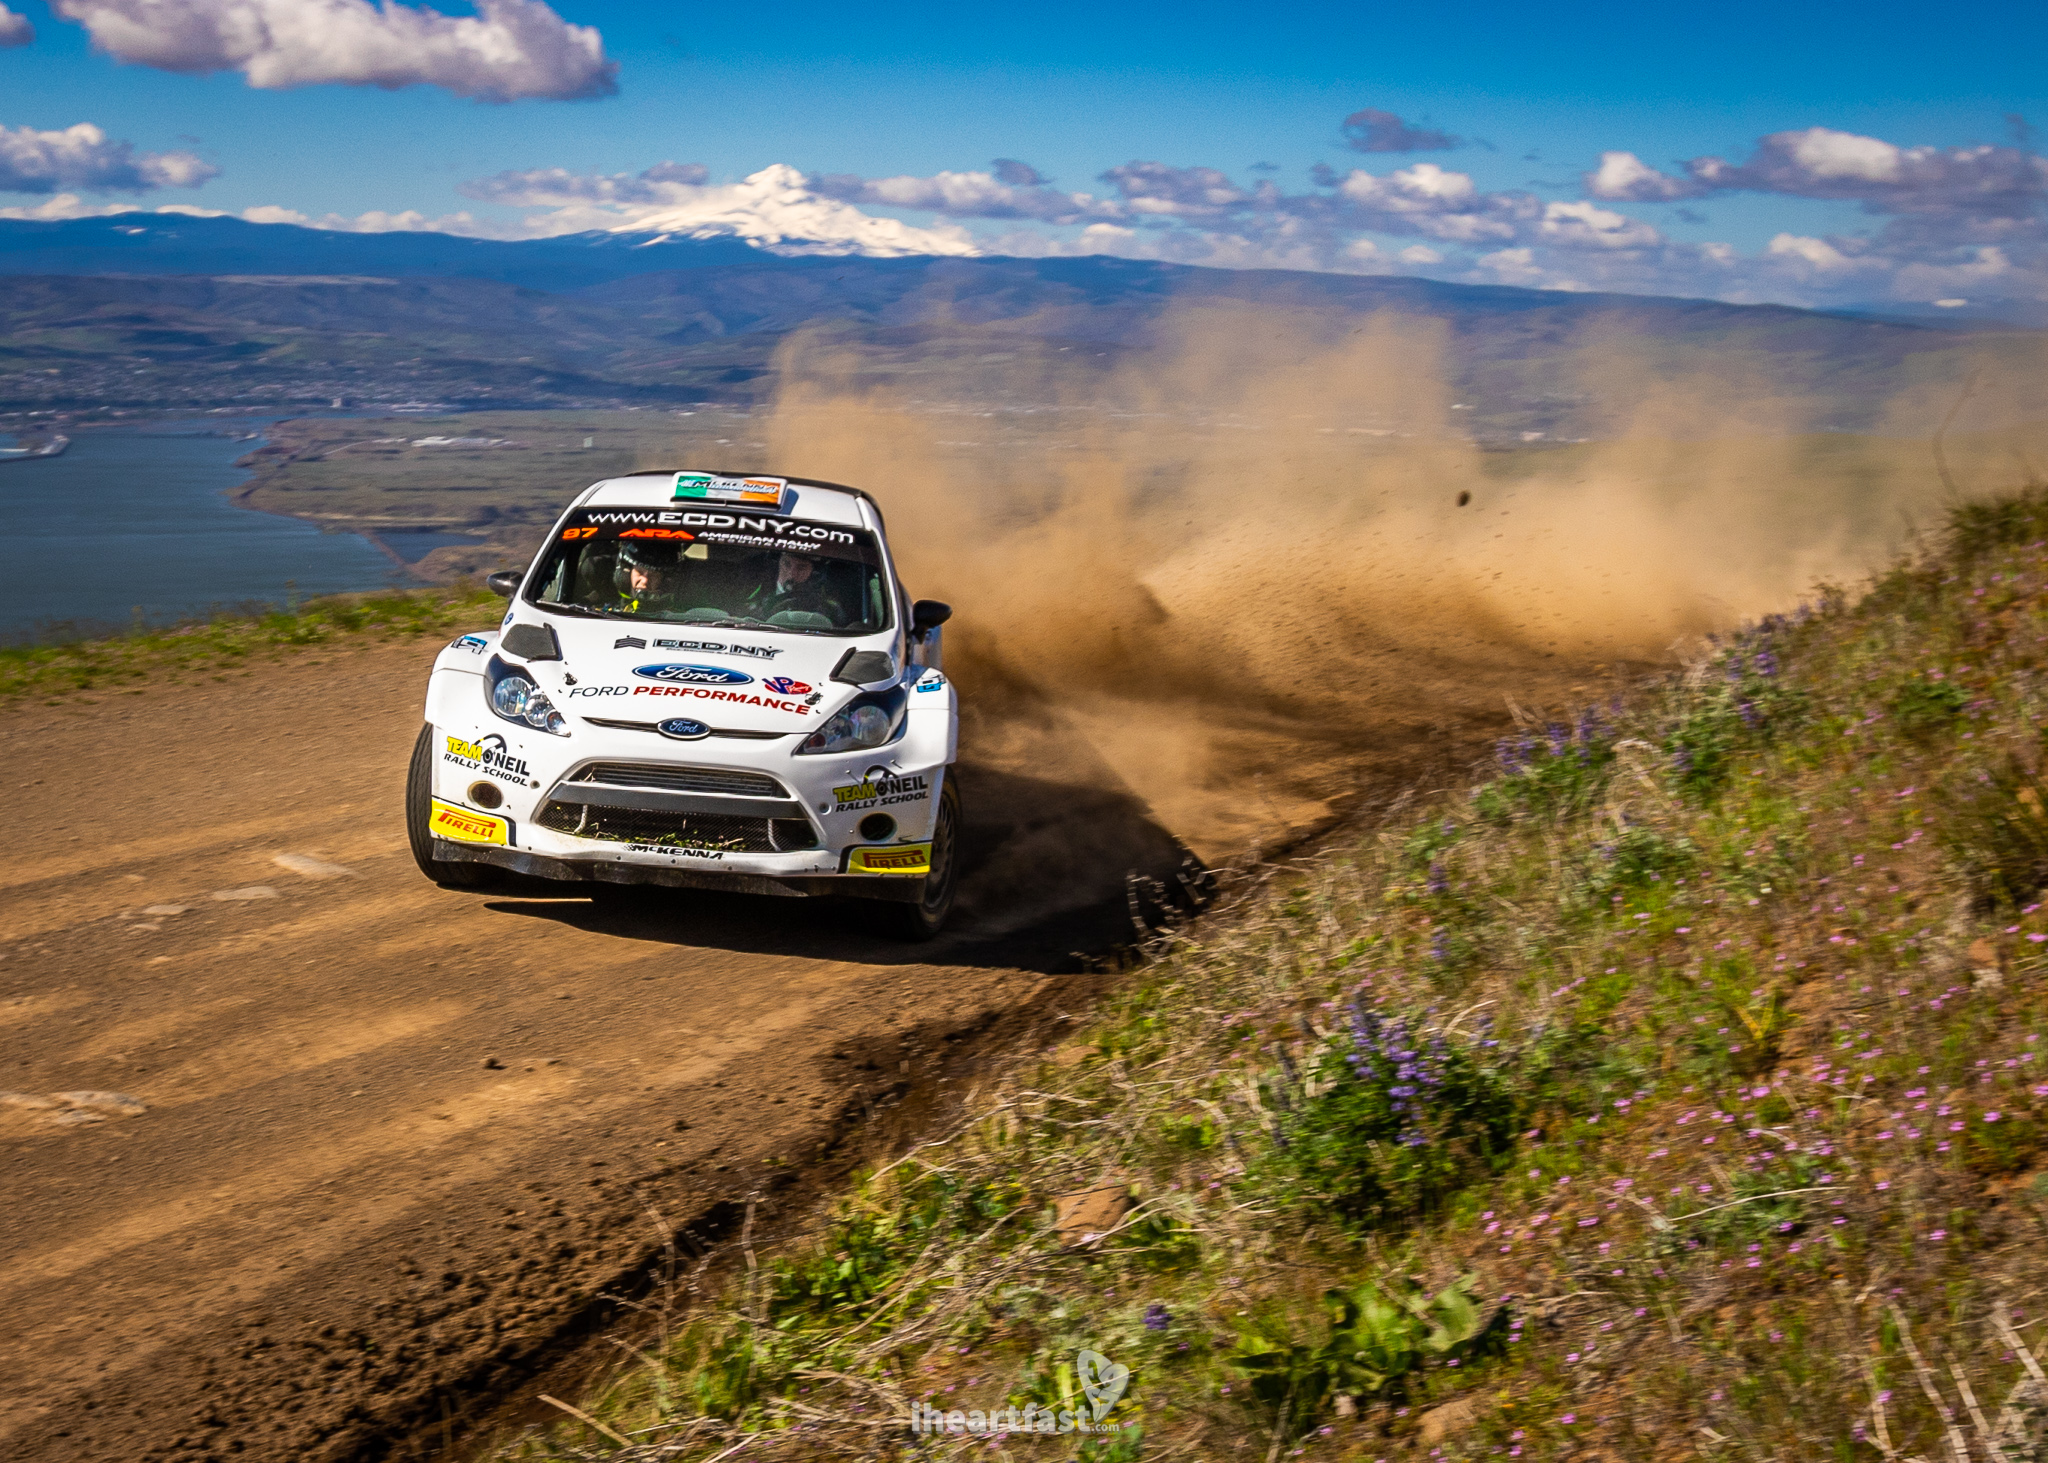 Barry McKenna gets sideways in his Ford Fiesta as Mt Hood lingers in the background